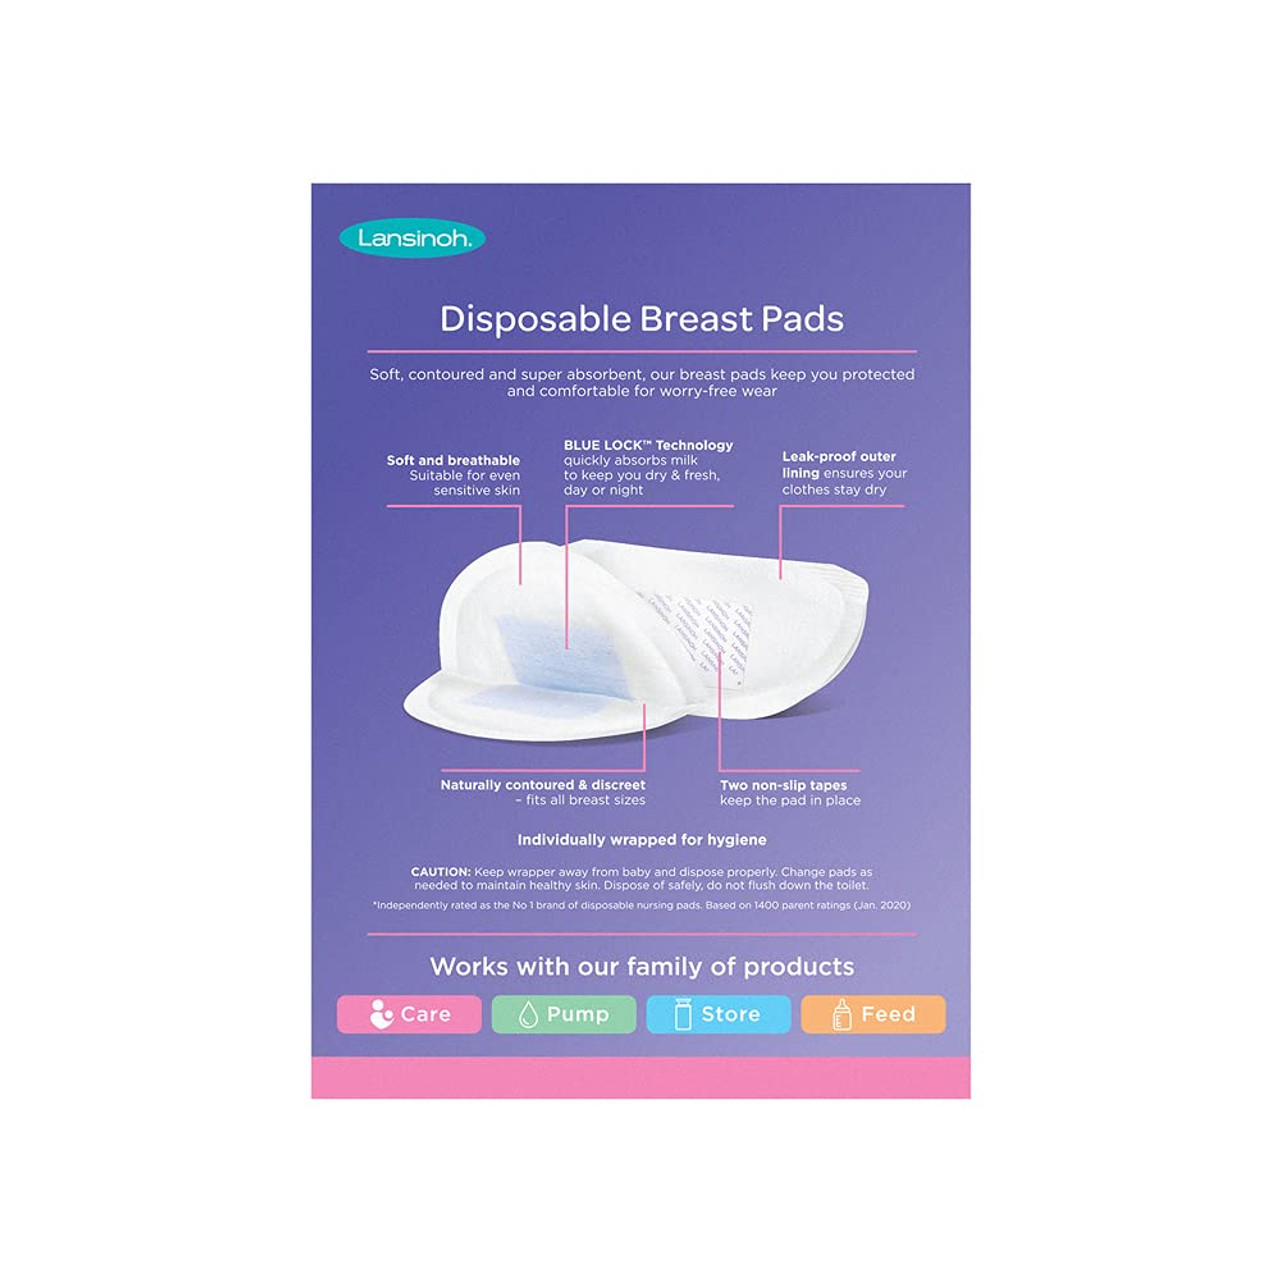 Lansinoh Stay Dry Disposable Nursing Pads for Breastfeeding, 200 Count  (Pack of 1)